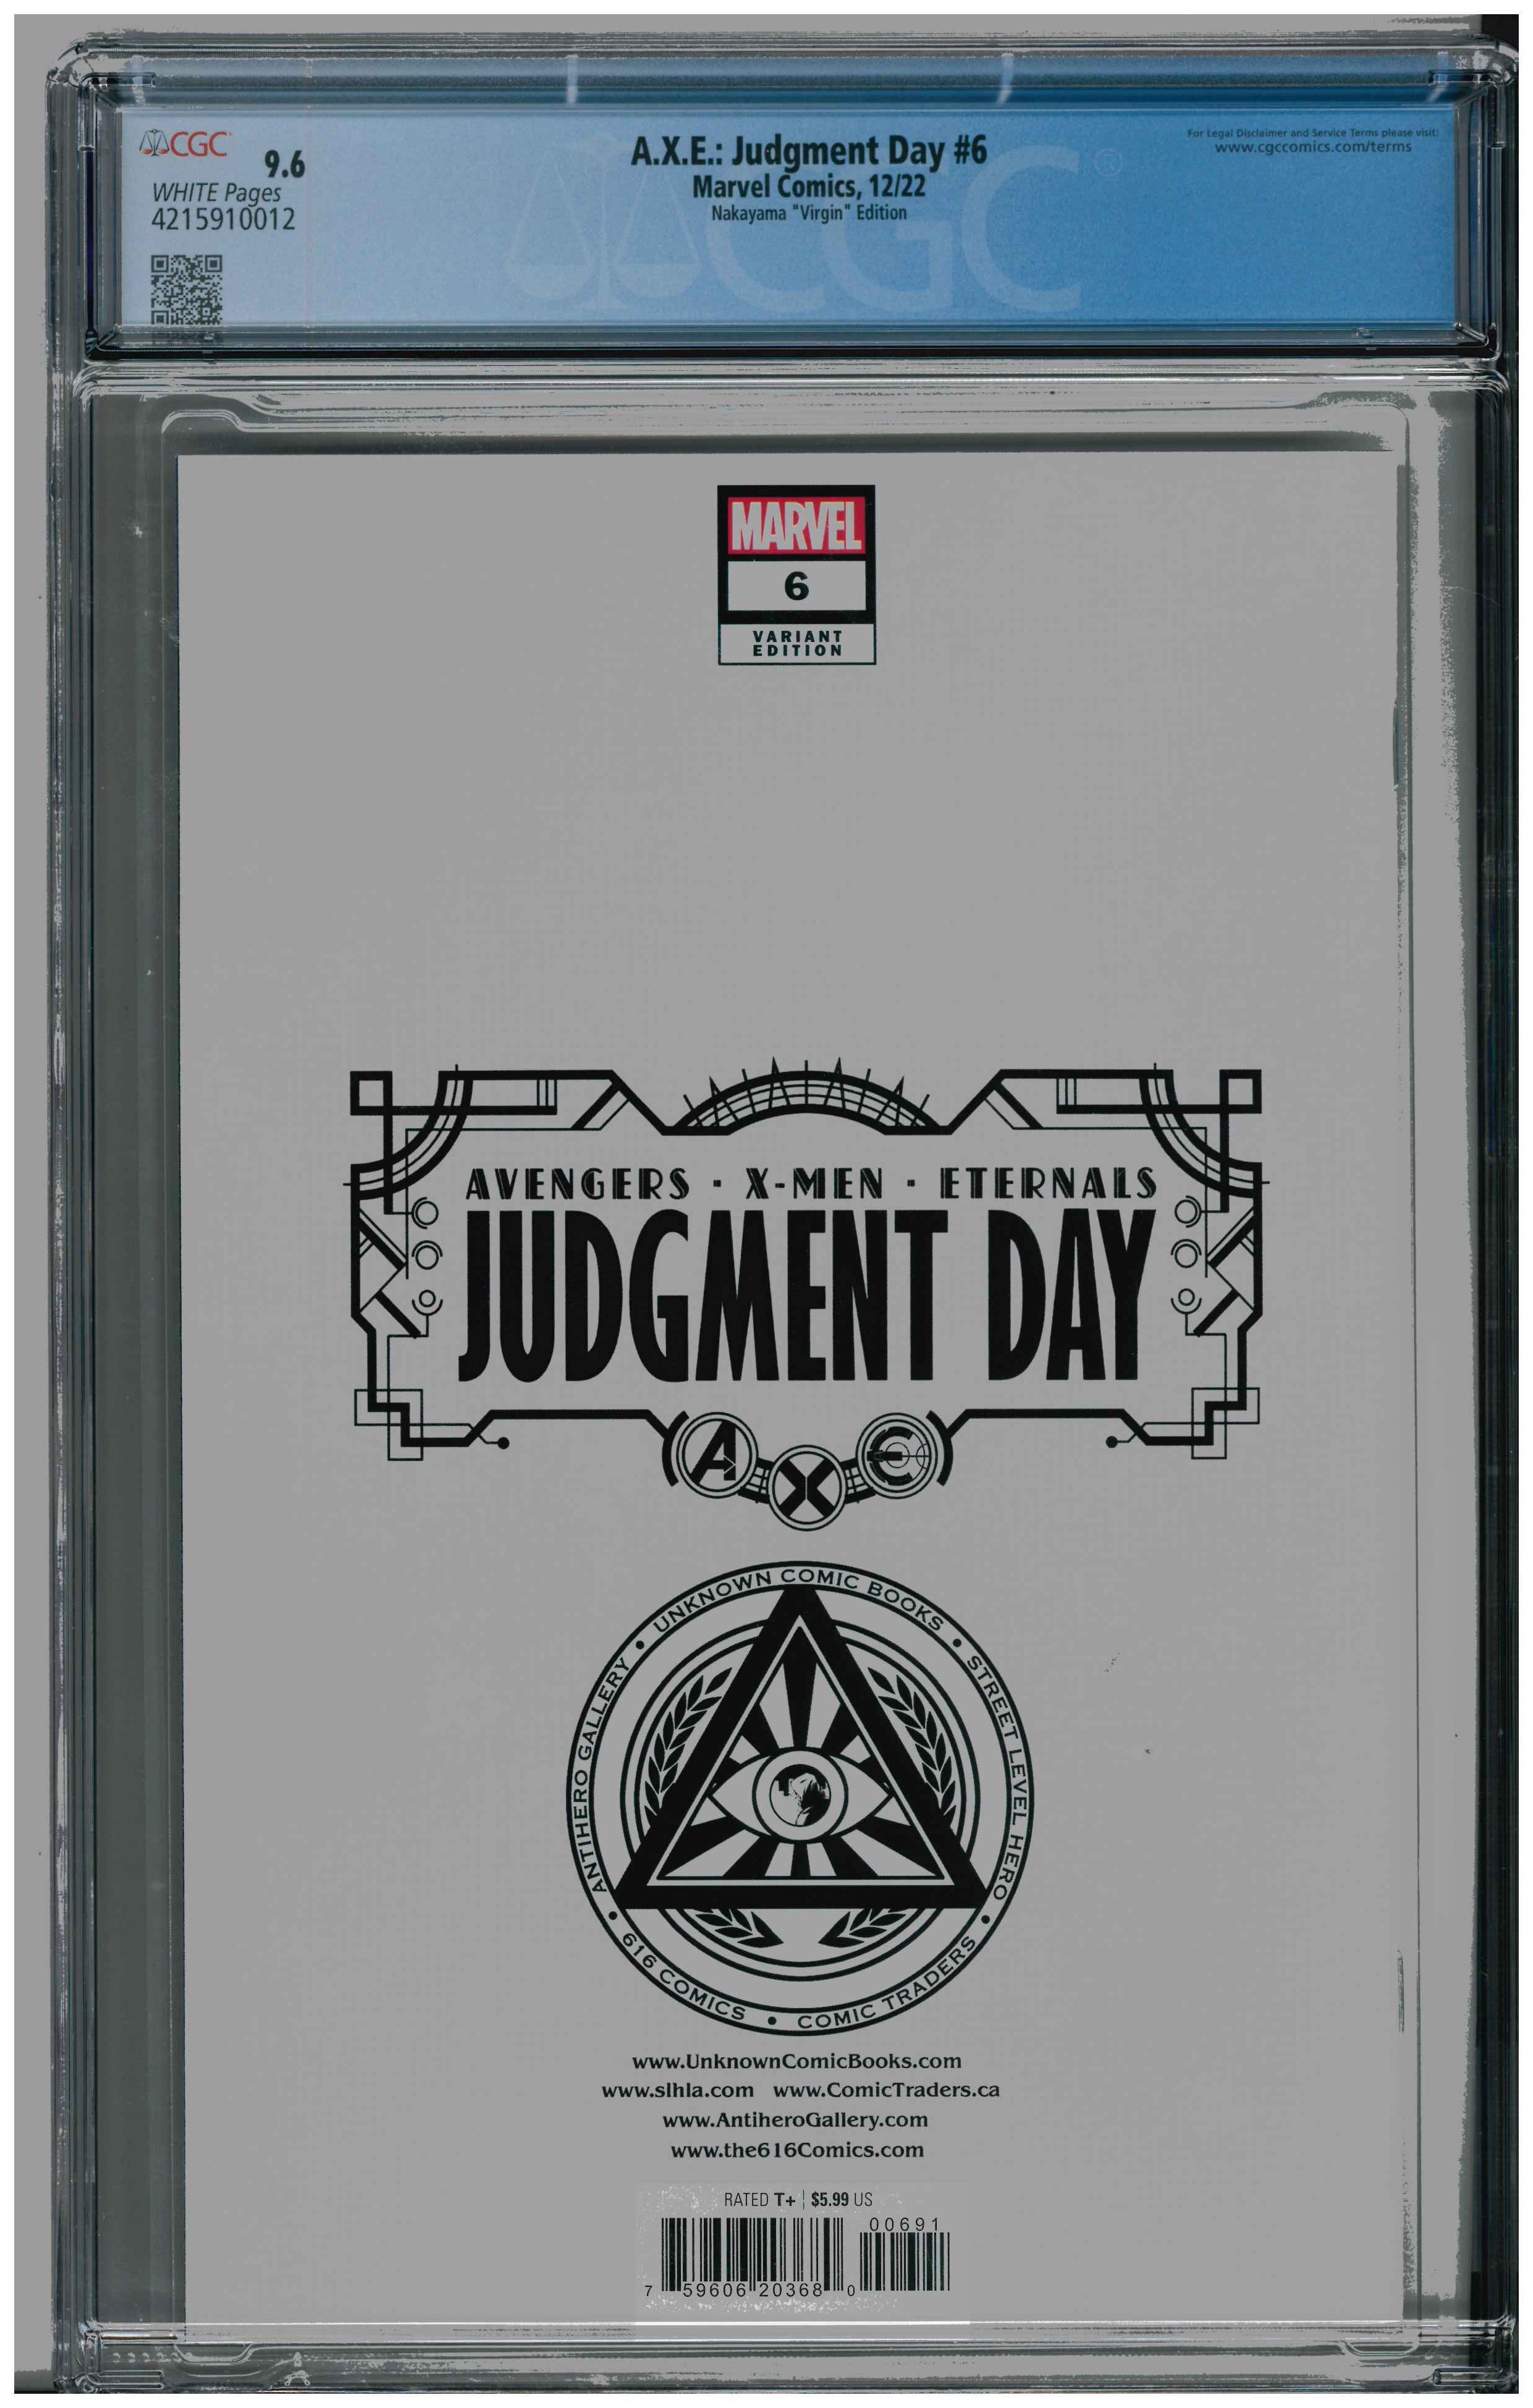 A.X.E.: Judgment Day #6 backside